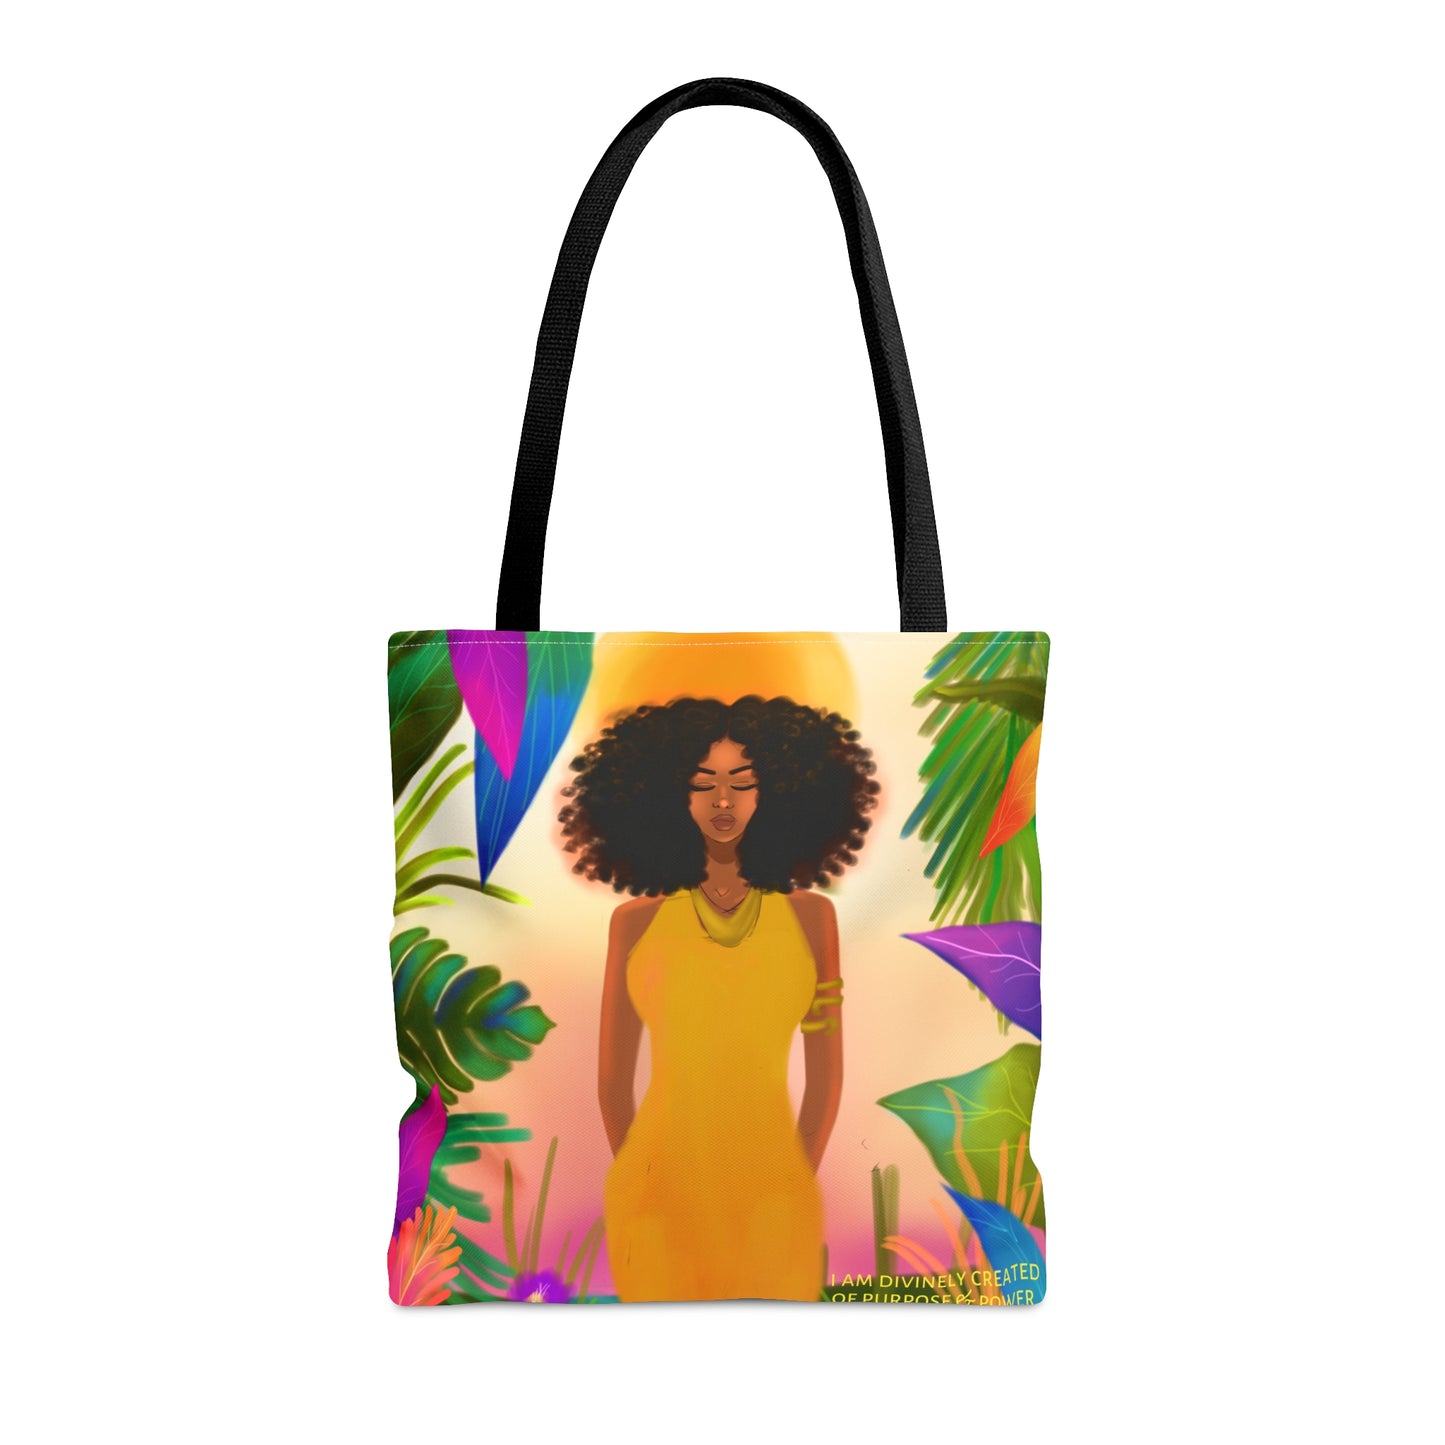 Divinely Created - Tote Bag